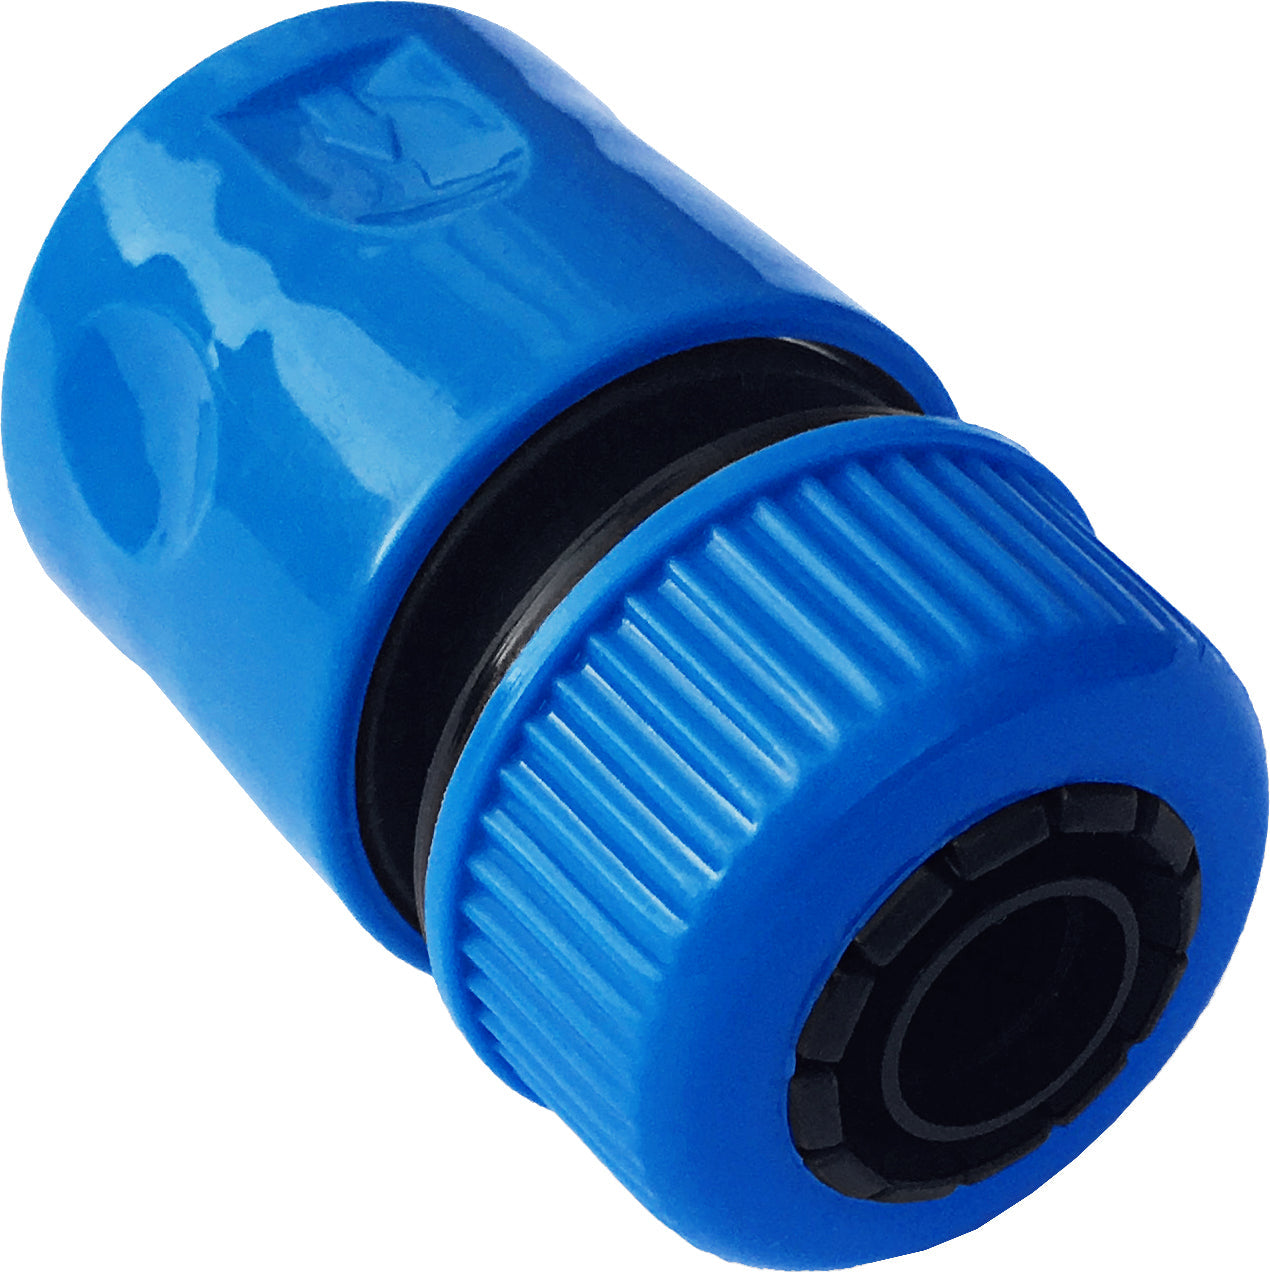 http://www.thehydrobros.com/cdn/shop/files/pipes-hoses-fittings-1-2-hose-end-connector-39090100928727.jpg?v=1682516468